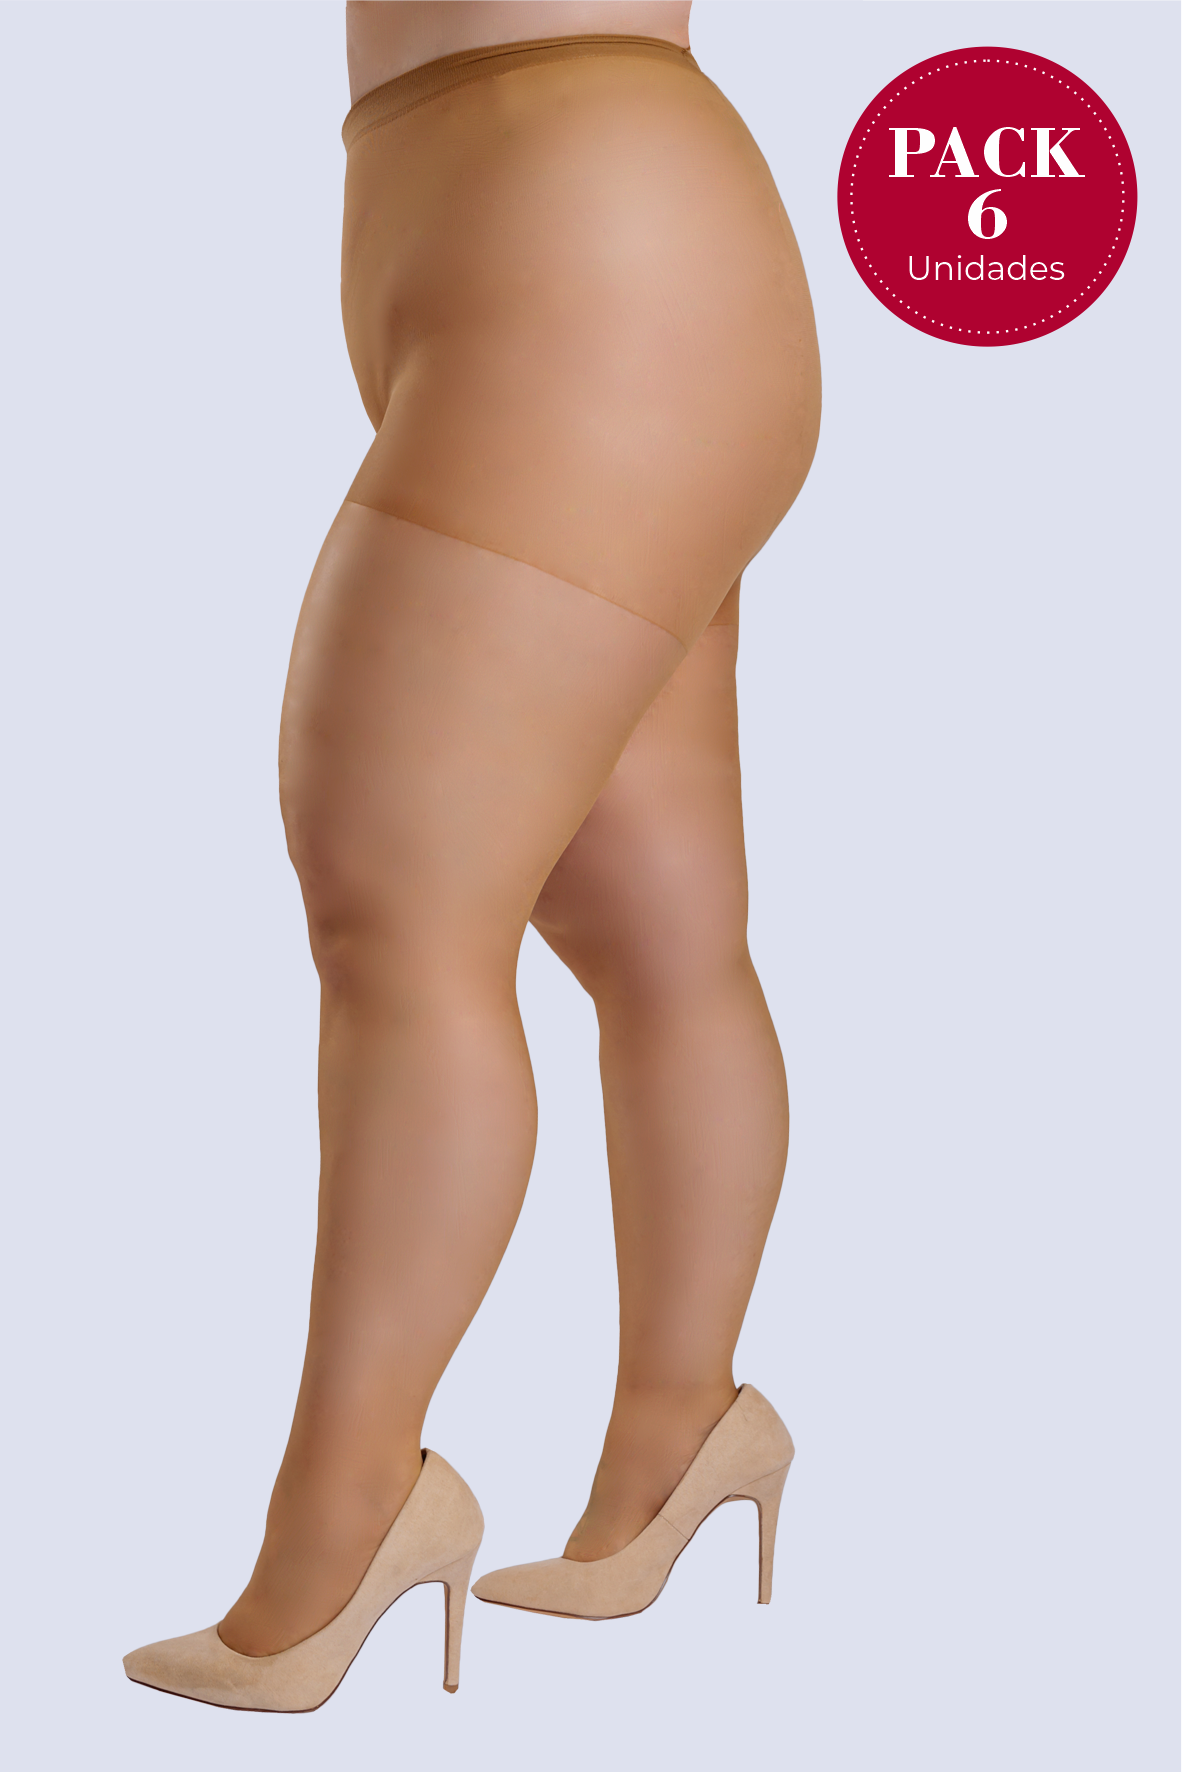 PACK 6 Collants Lycra Skin Mate Plus Size